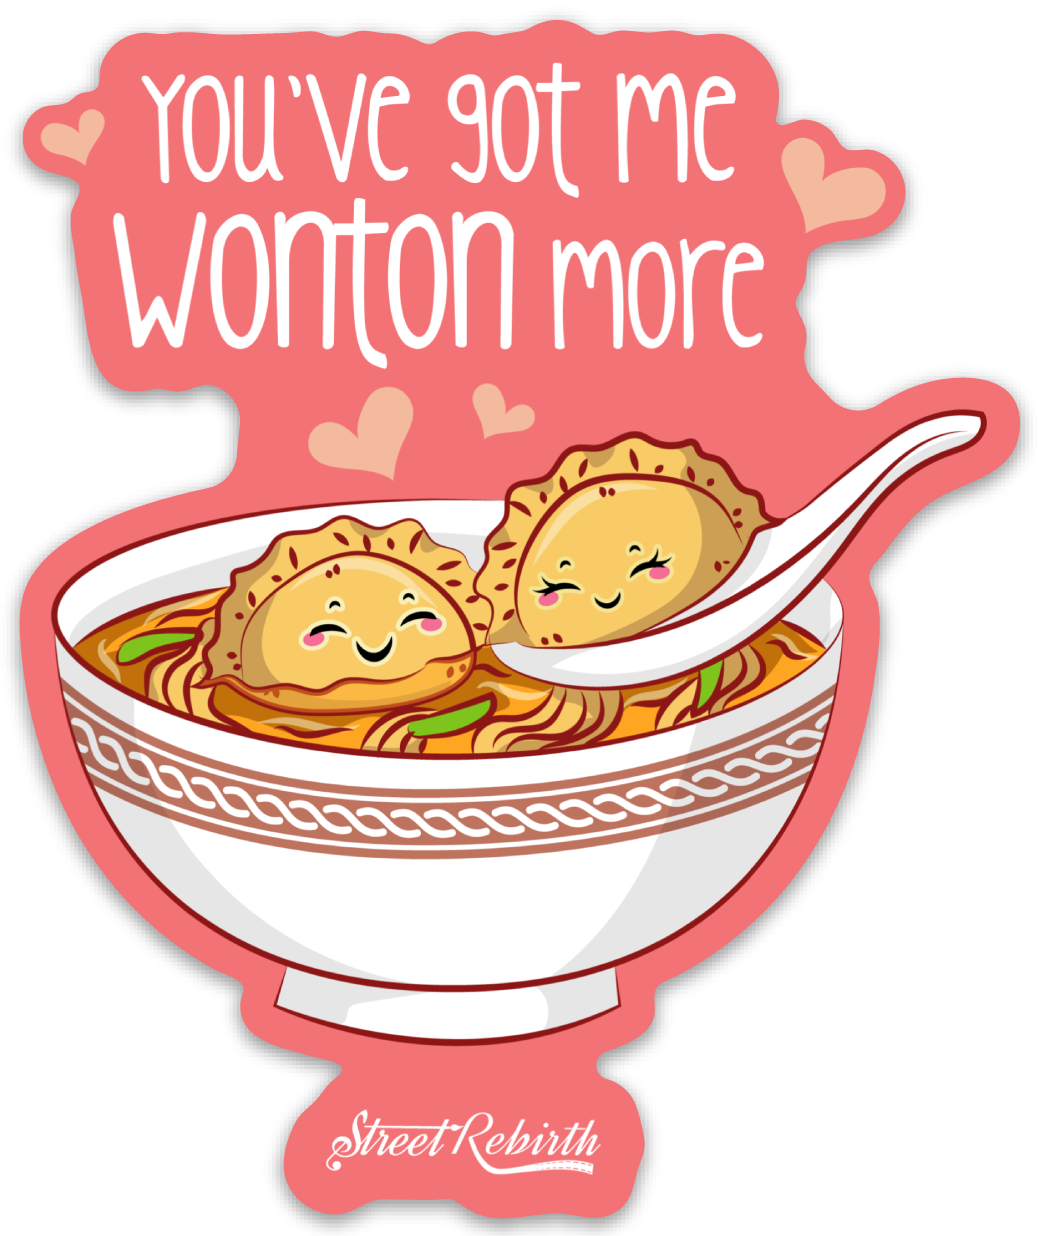 YOU'VE GOT ME WONTON MORE PUN STICKER – ONE 4 INCH WATER PROOF VINYL STICKER – FOR HYDRO FLASK, SKATEBOARD, LAPTOP, PLANNER, CAR, COLLECTING, GIFTING